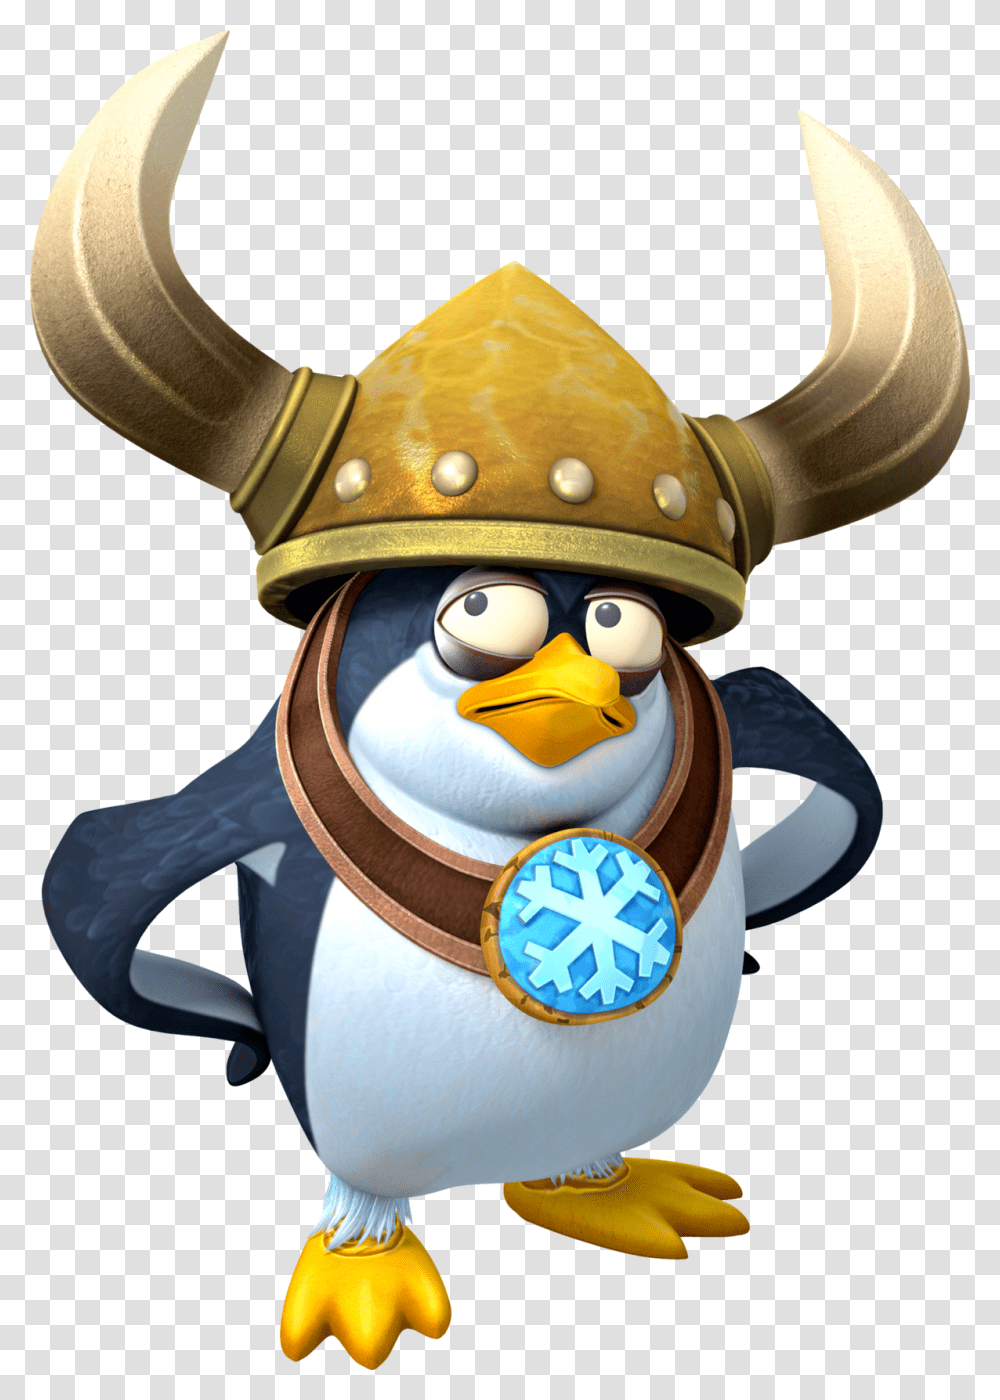 Donkey Kong Tropical Freeze Penguin, Toy, Angry Birds, Pottery Transparent Png